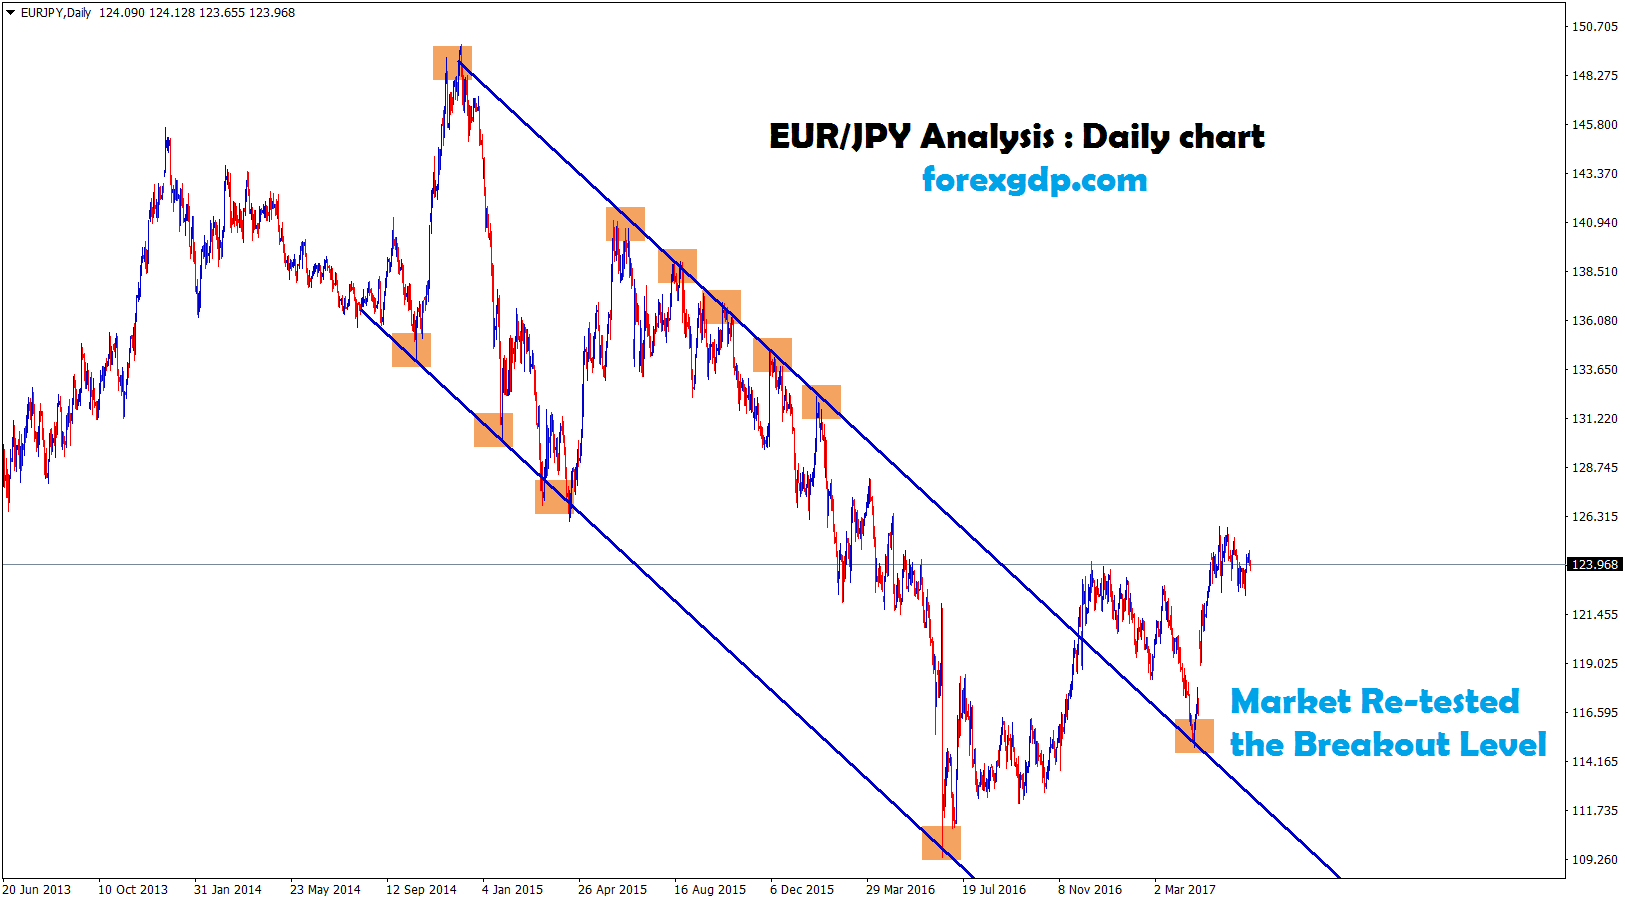 forex market breakout and re-tested the breakout level in eurjpy